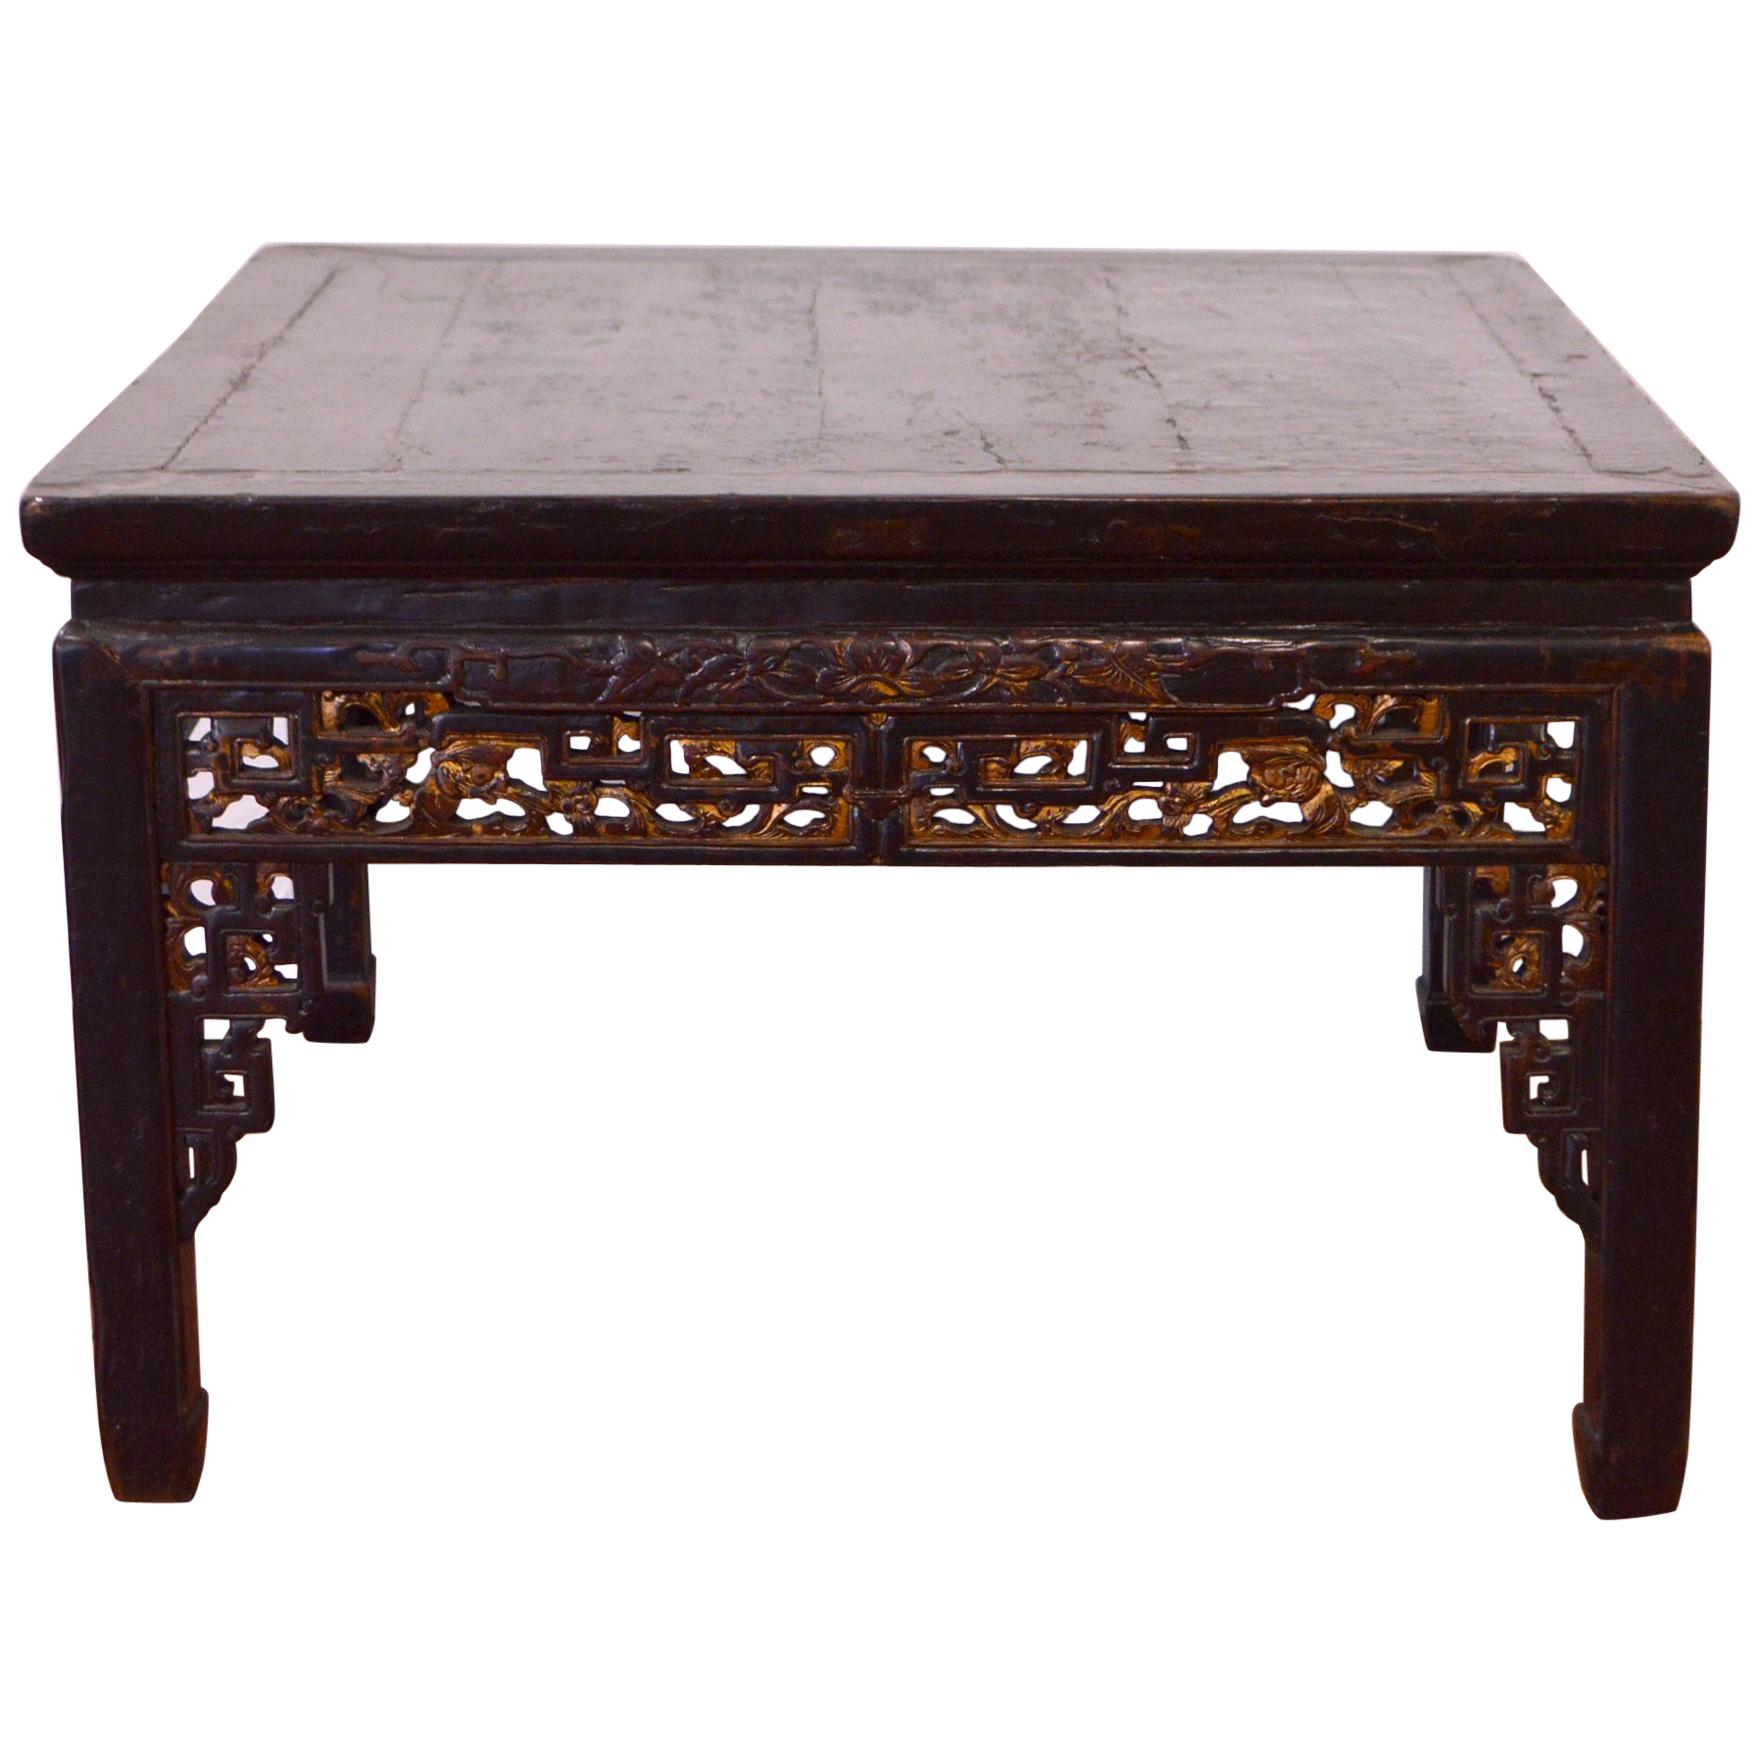 Early 19th Century Chinese Coffe Table - Elm Wood